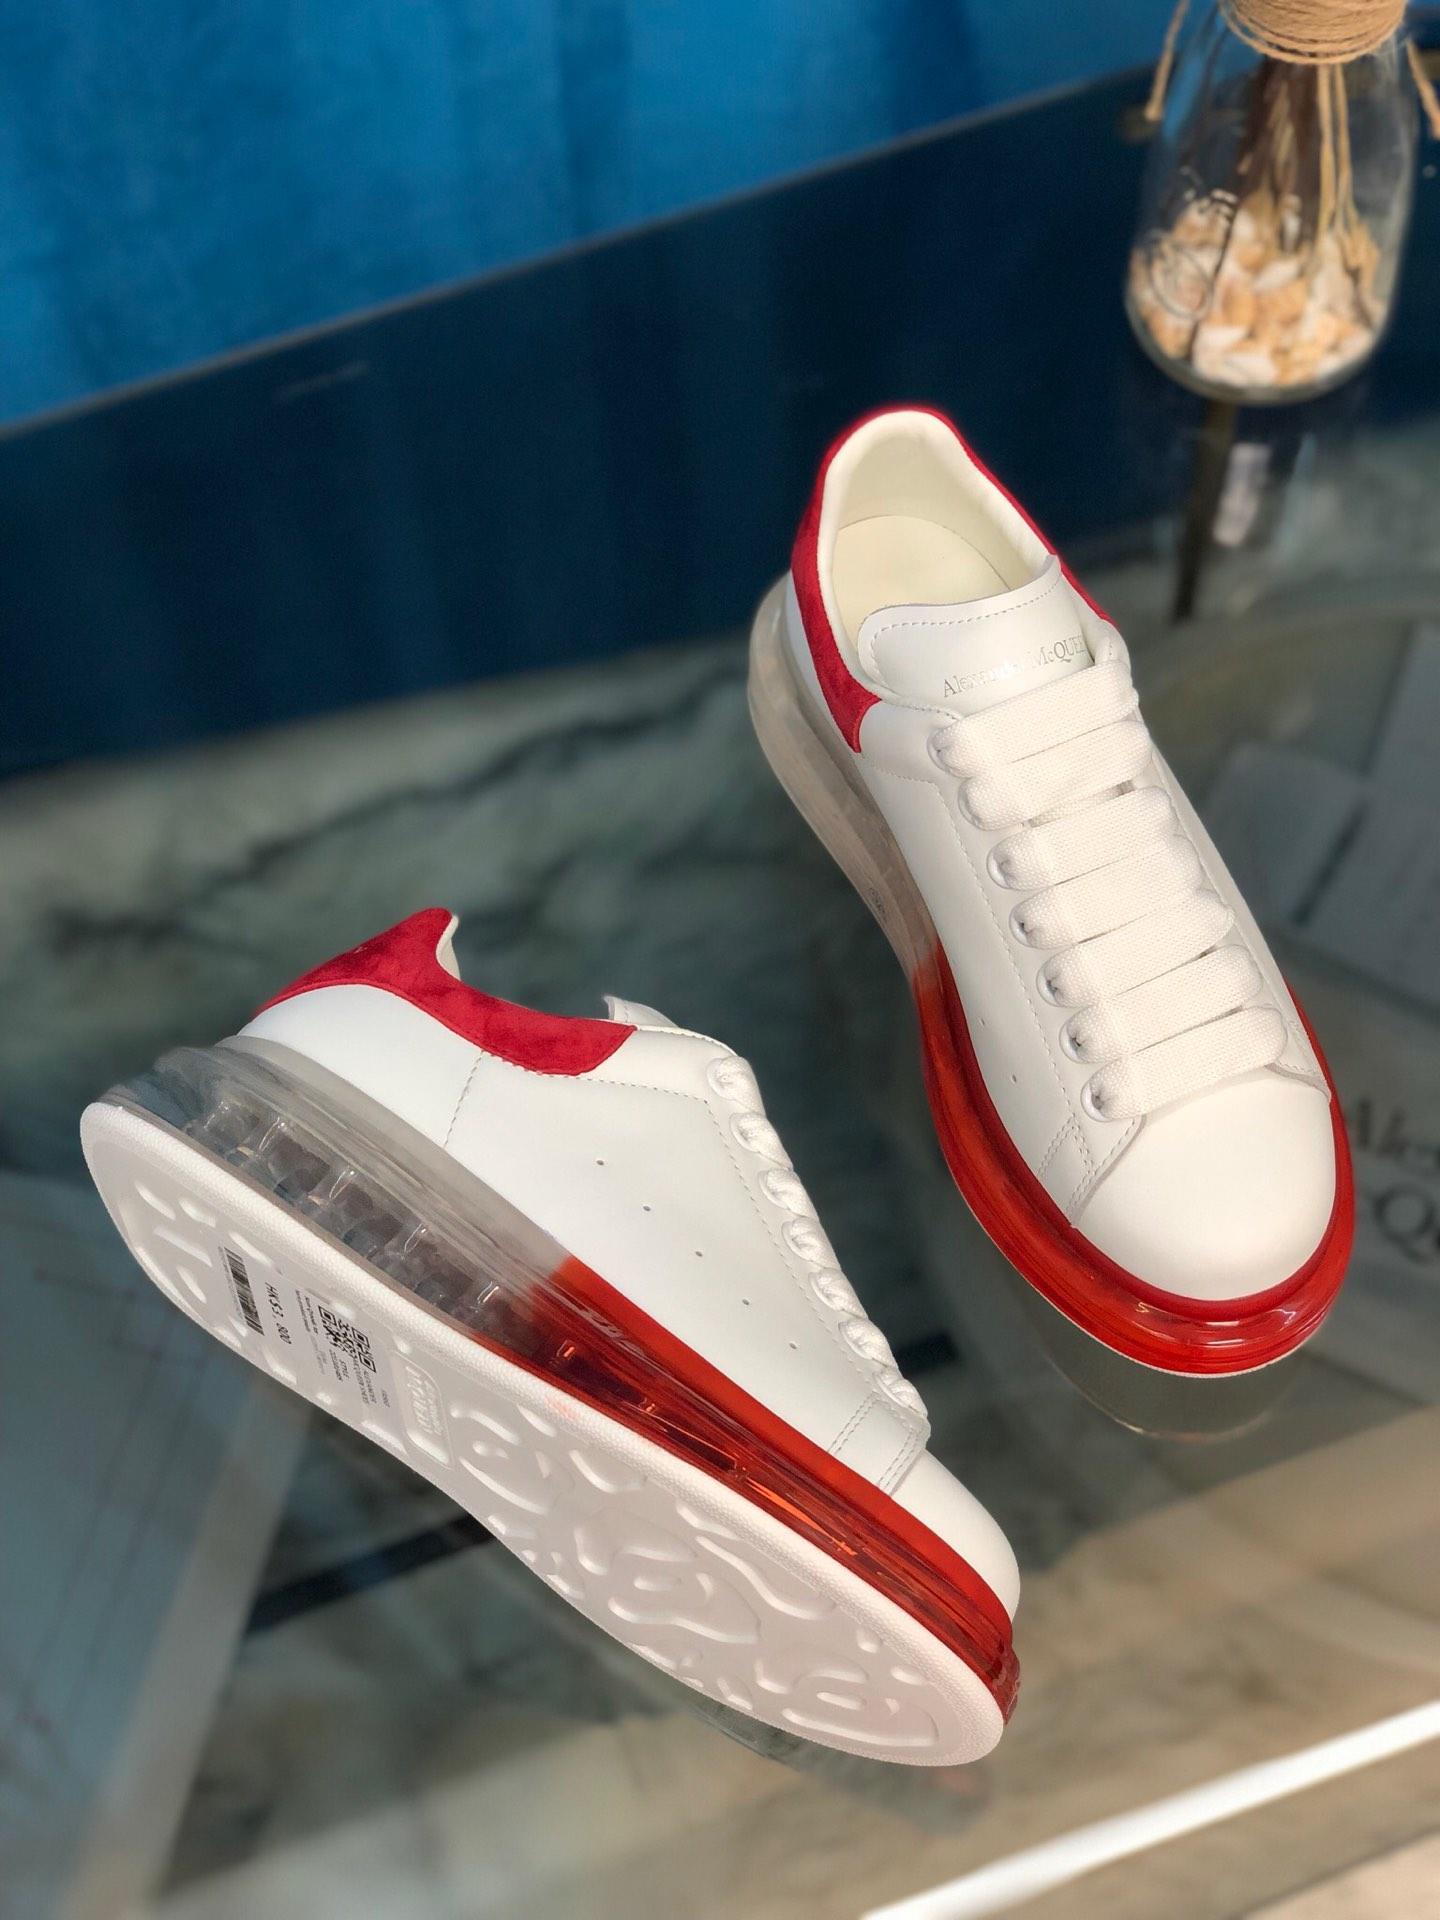 Alexander McQueen Fahion Sneaker White and red heel with transparent sole MS100026